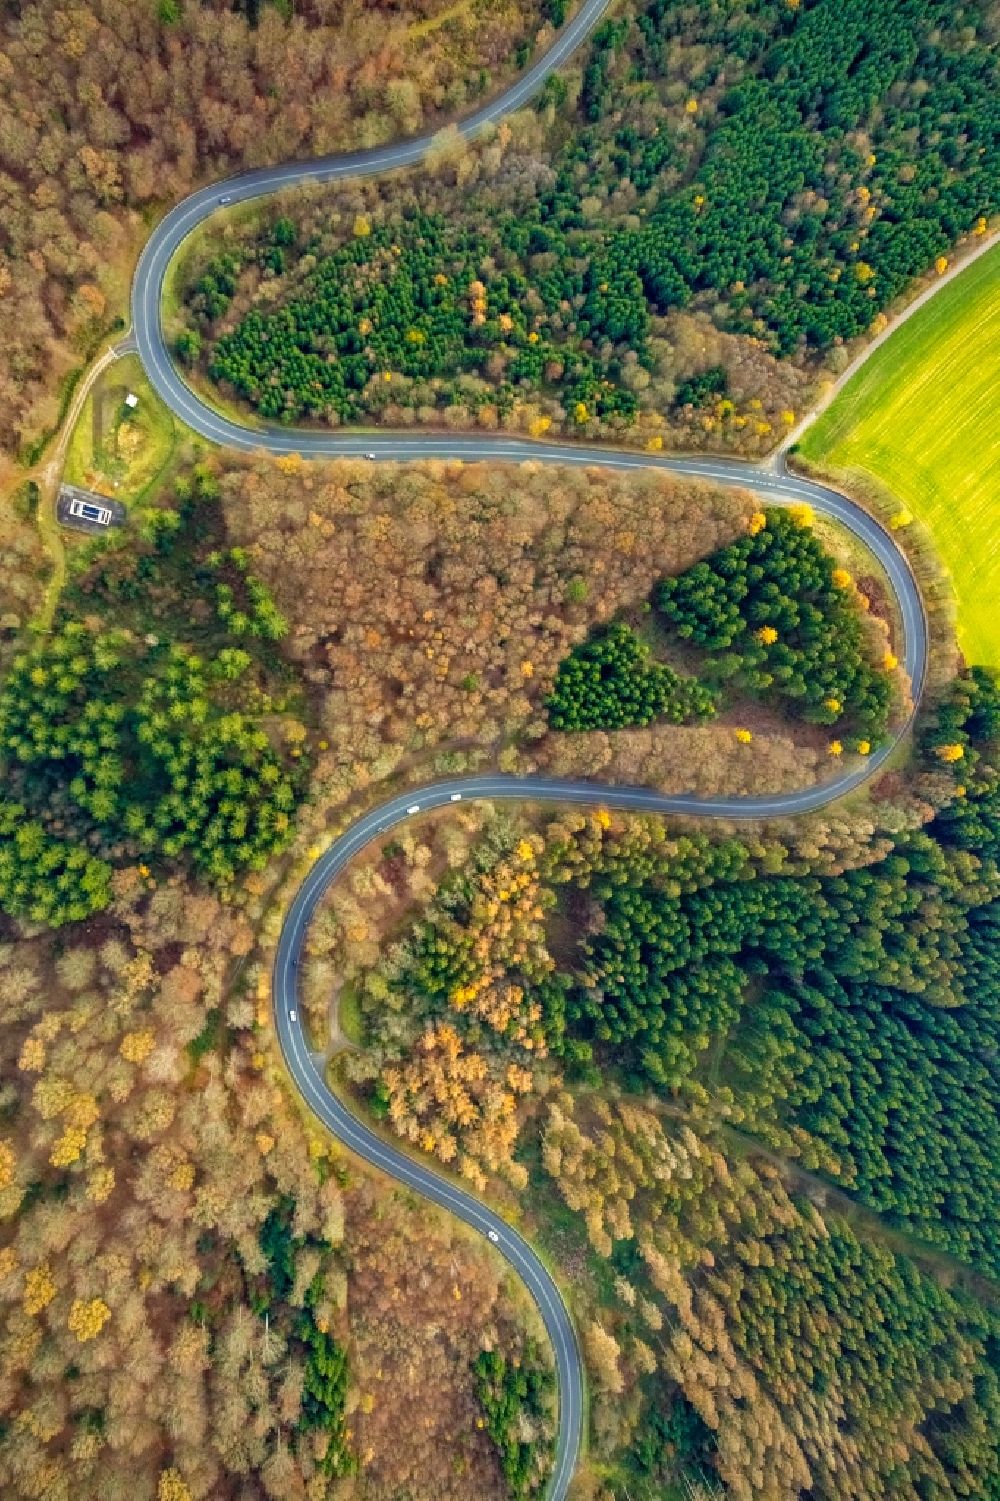 Vertical aerial photograph Redlendorf - Vertical aerial view from the satellite perspective of the serpentine-shaped curve of a road guide of federal street L323 in a forest in Redlendorf in the state North Rhine-Westphalia, Germany